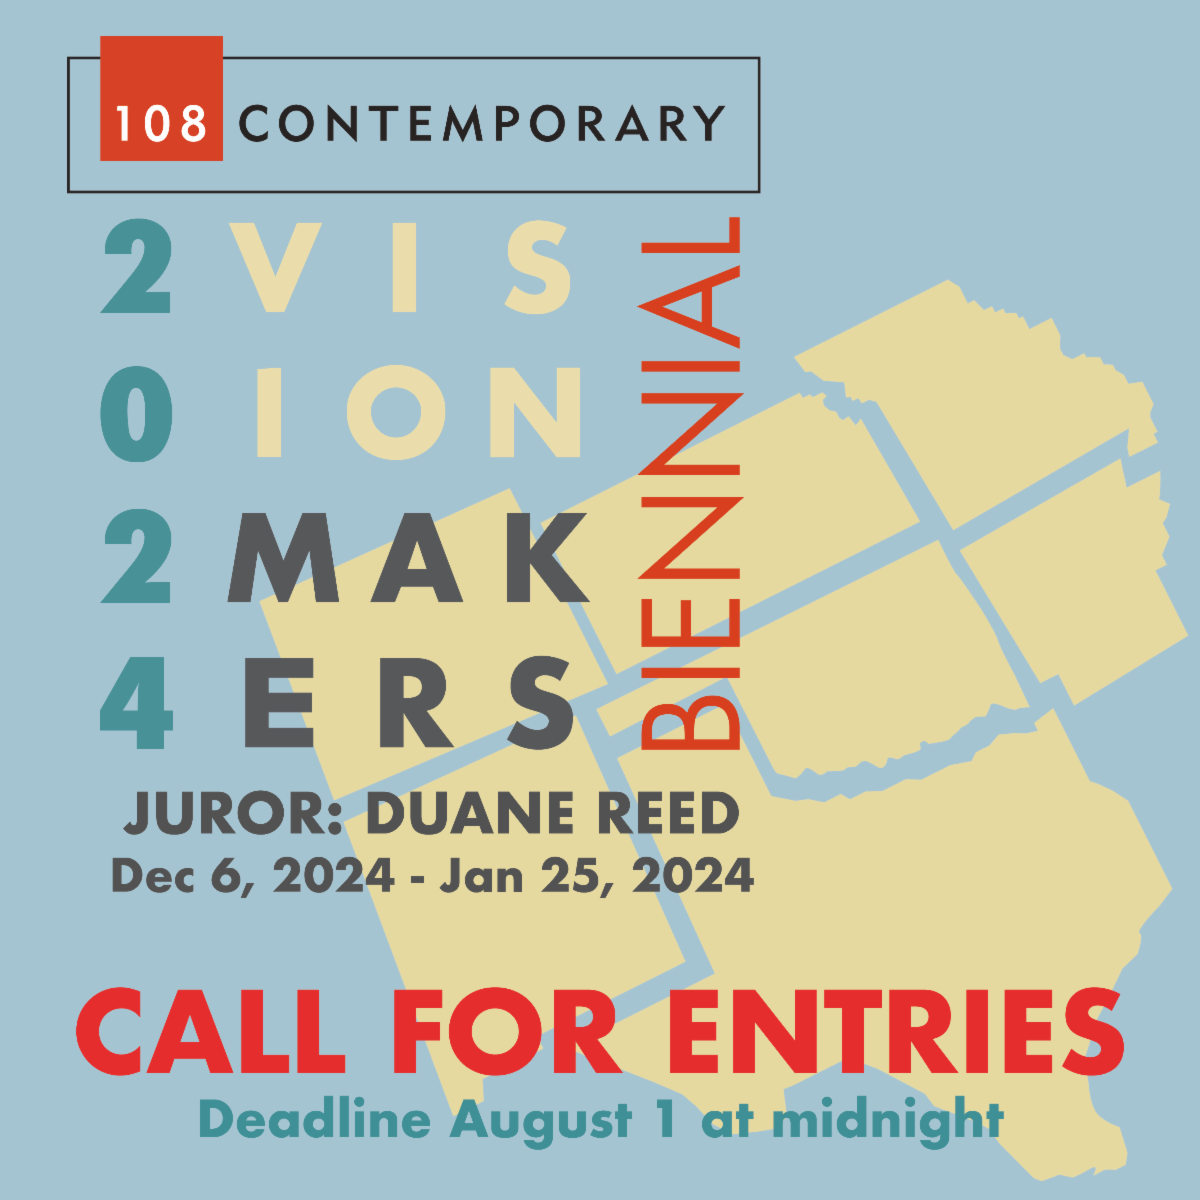 108|Contemporary is seeking entries for VisionMakers 2024, the regional signature-juried biennial exhibition for contemporary fine craft-based artists. Juried by Duane Reed, this exhibition will be on view December 5, 2024 - January 25, 2025 in the heart of the Tulsa Arts District.